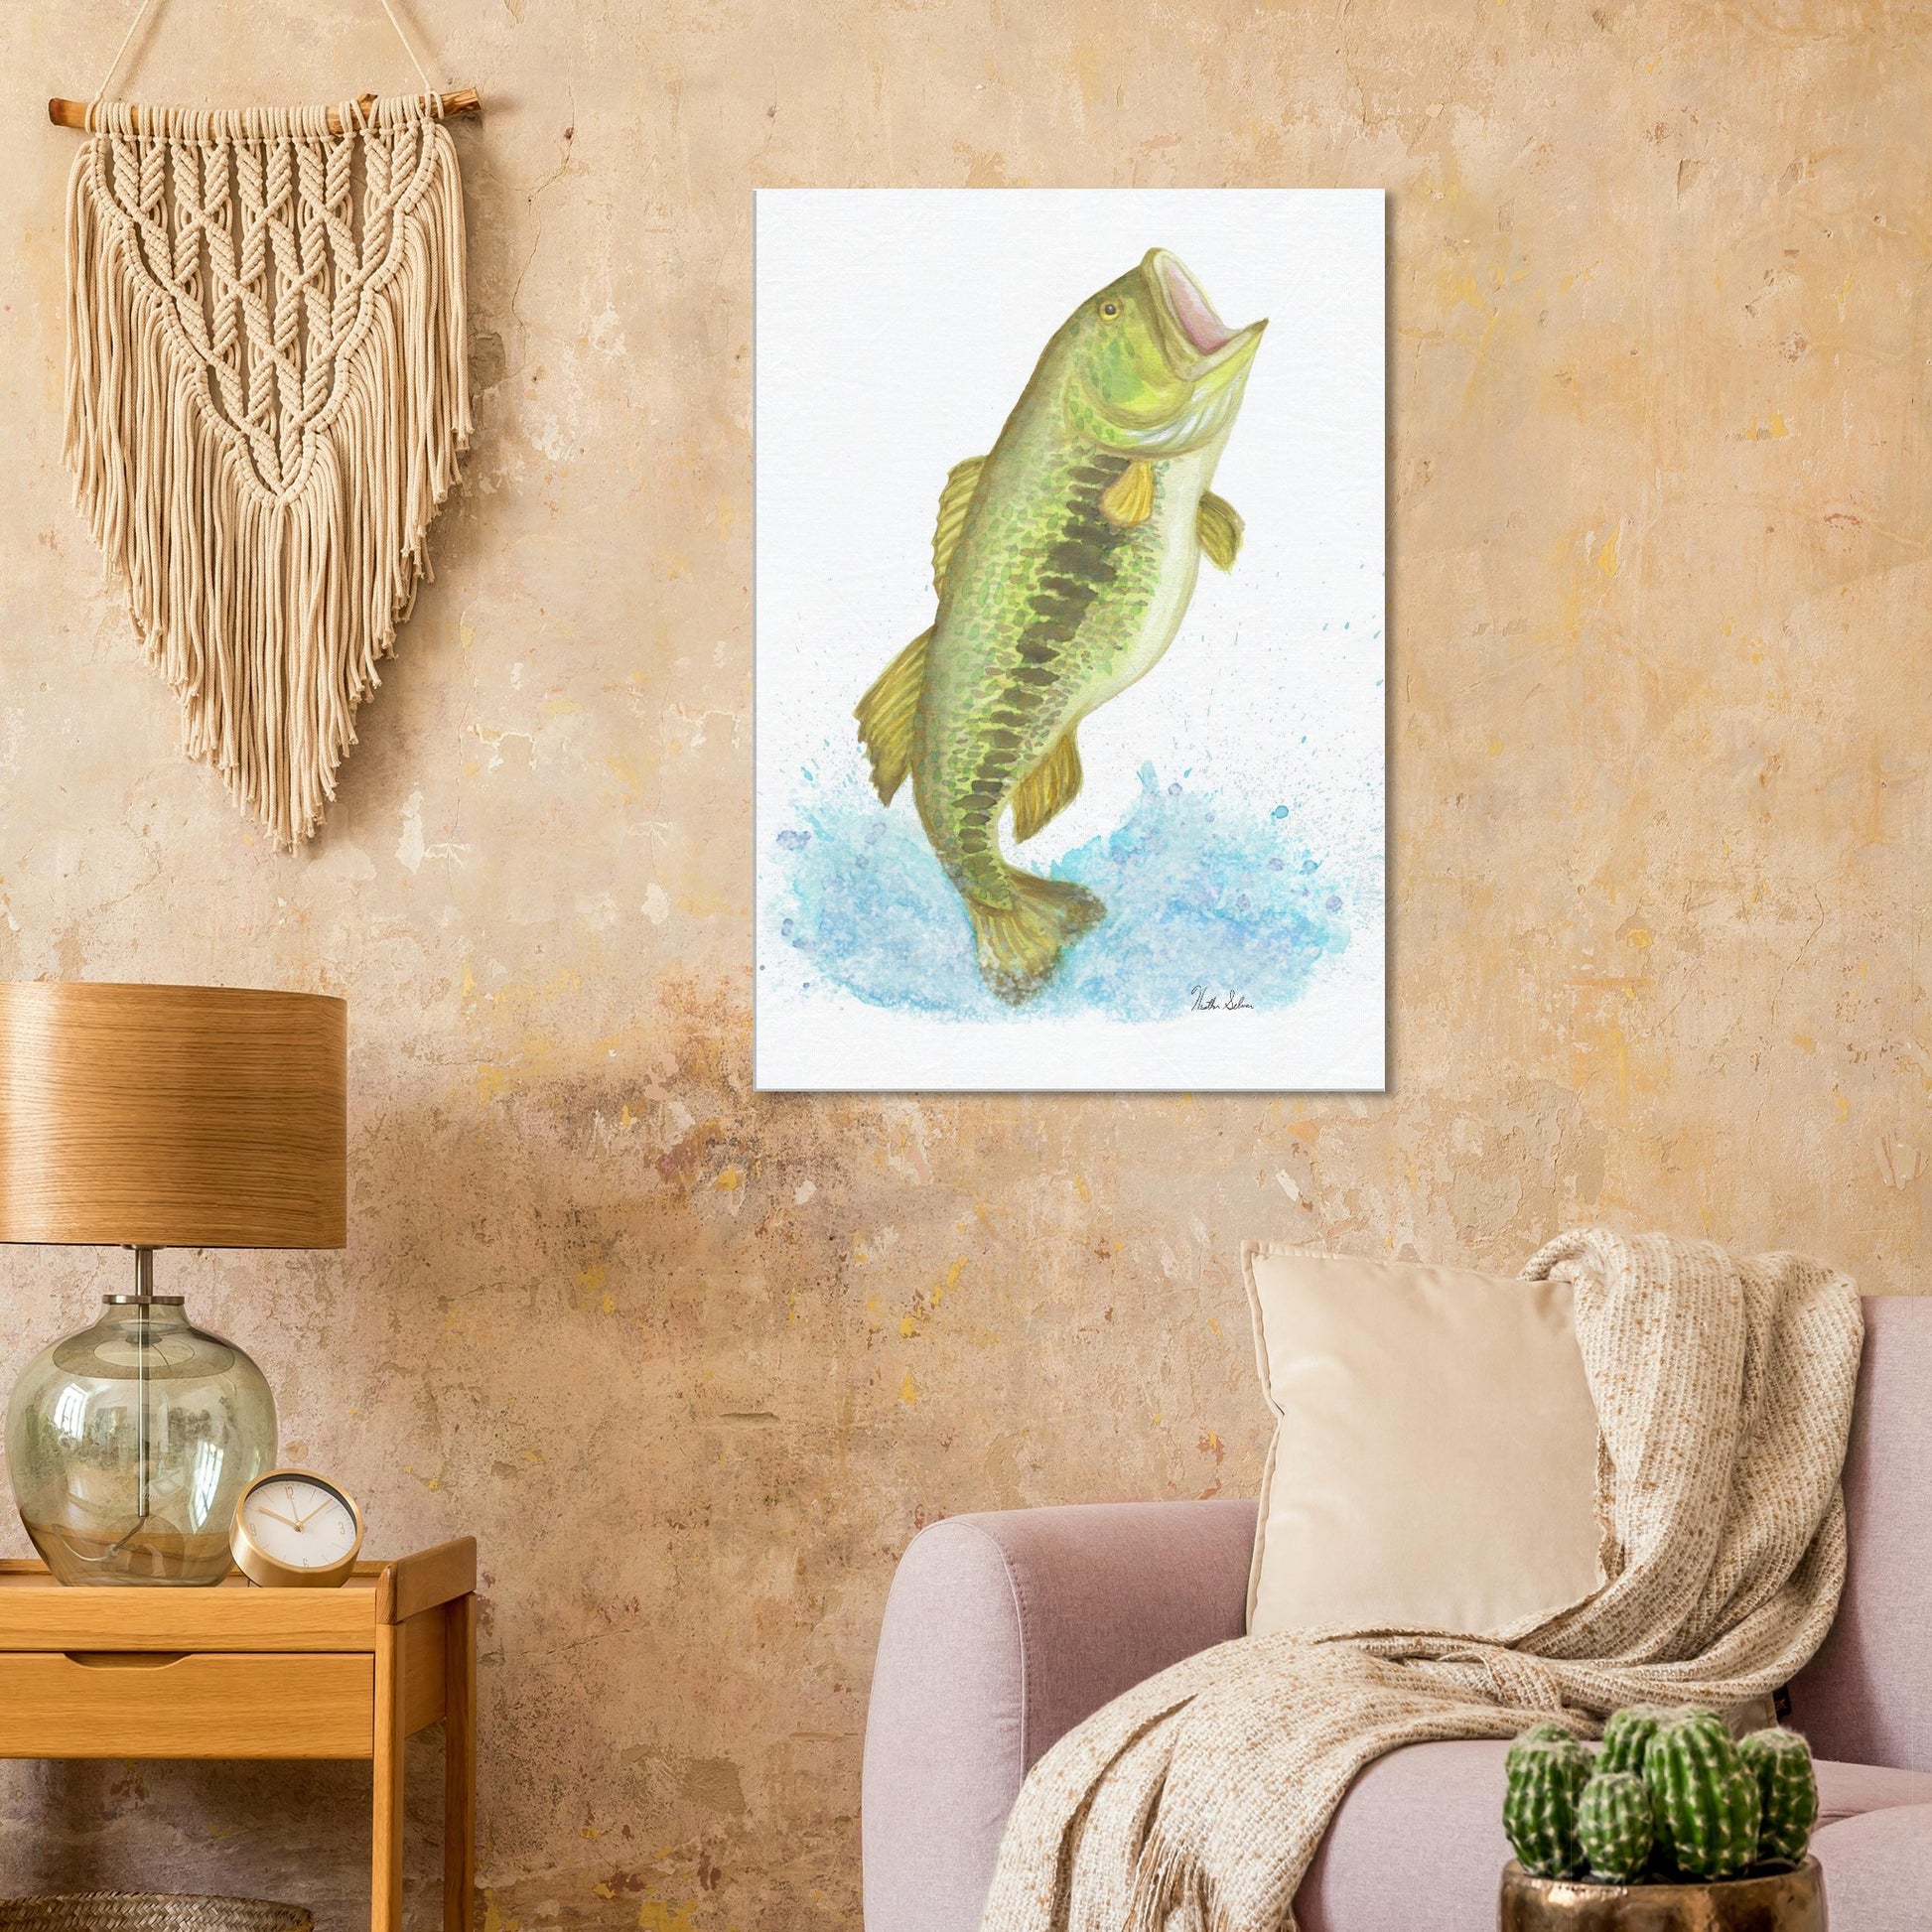 28 by 40 inch slim canvas wall art print featuring a watercolor painting of a largemouth bass leaping from the water. Shown on beige wall by macramé above pink sofa, side table and lamp.